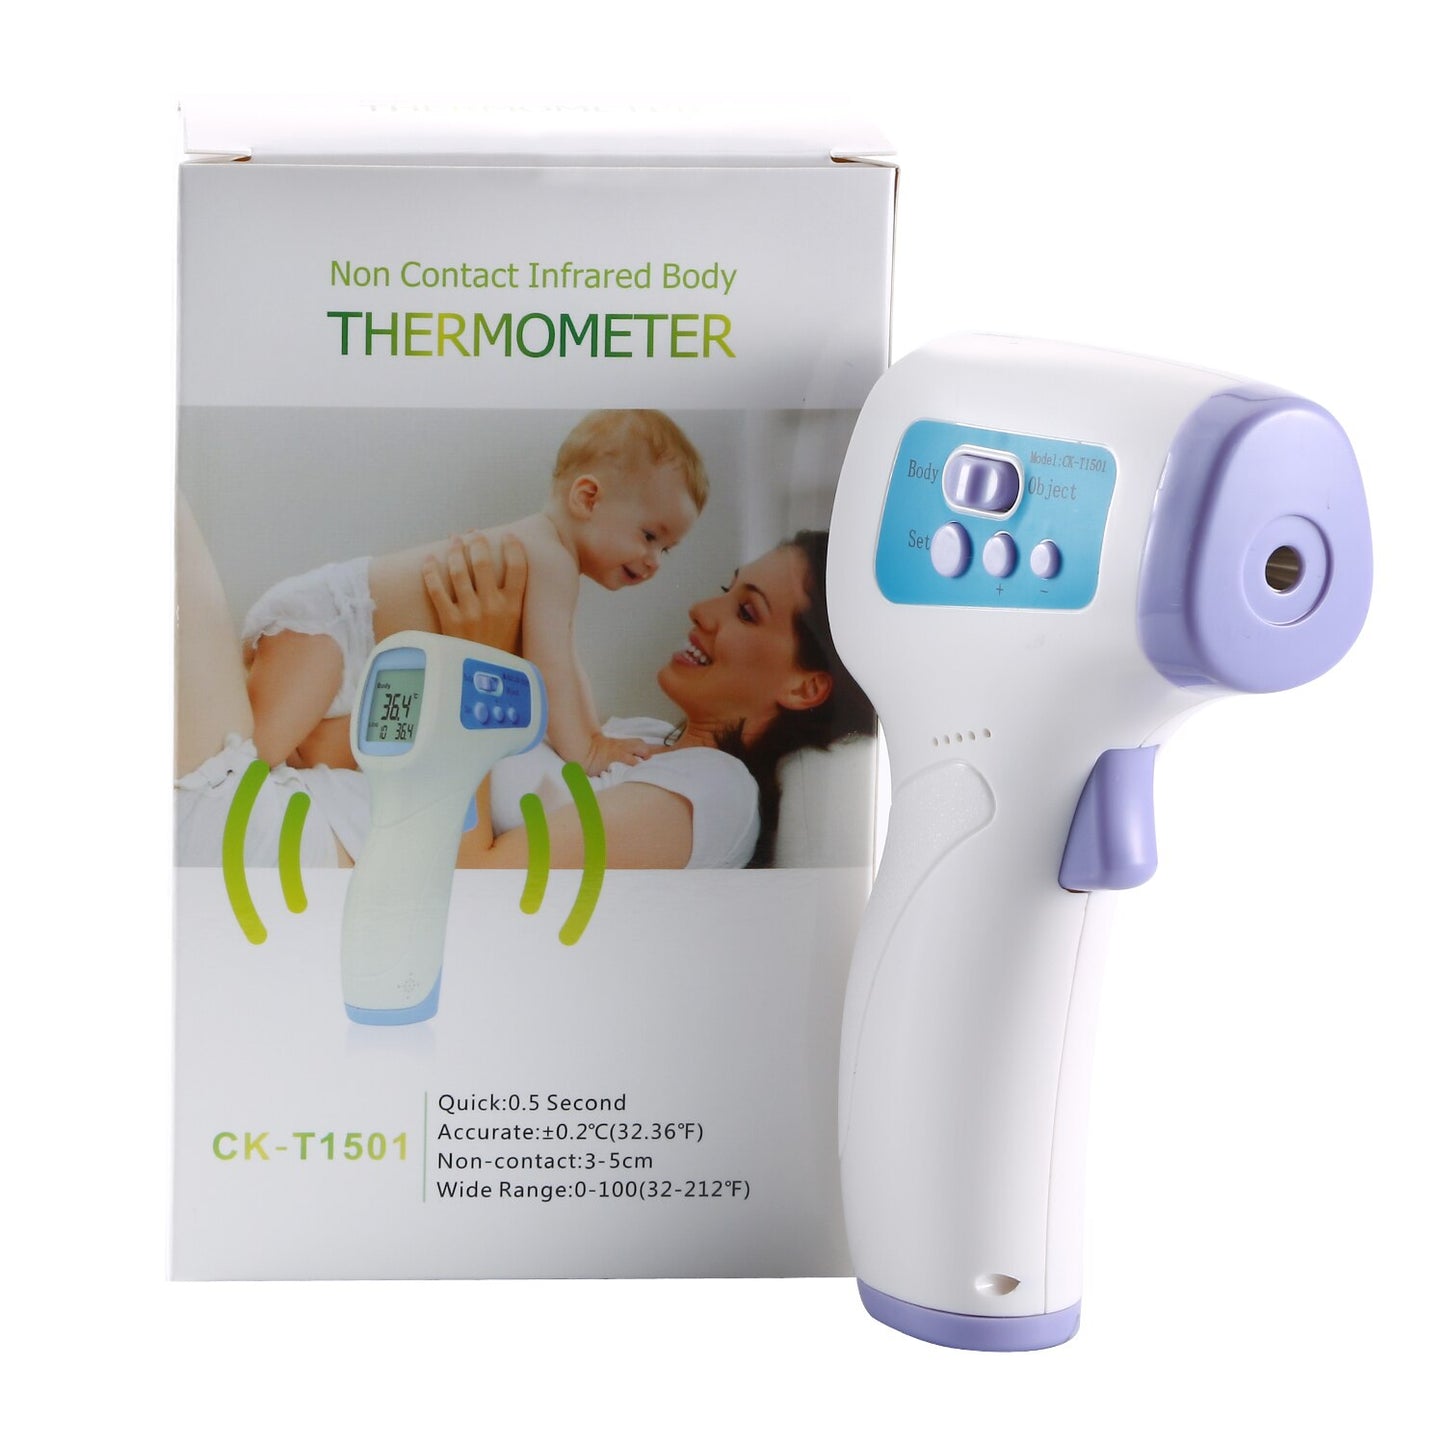 Infrared Forehead Body Thermometer Gun Non-contact LCD displayTemperature Measurement Device Standing Thermometer Adult Kids